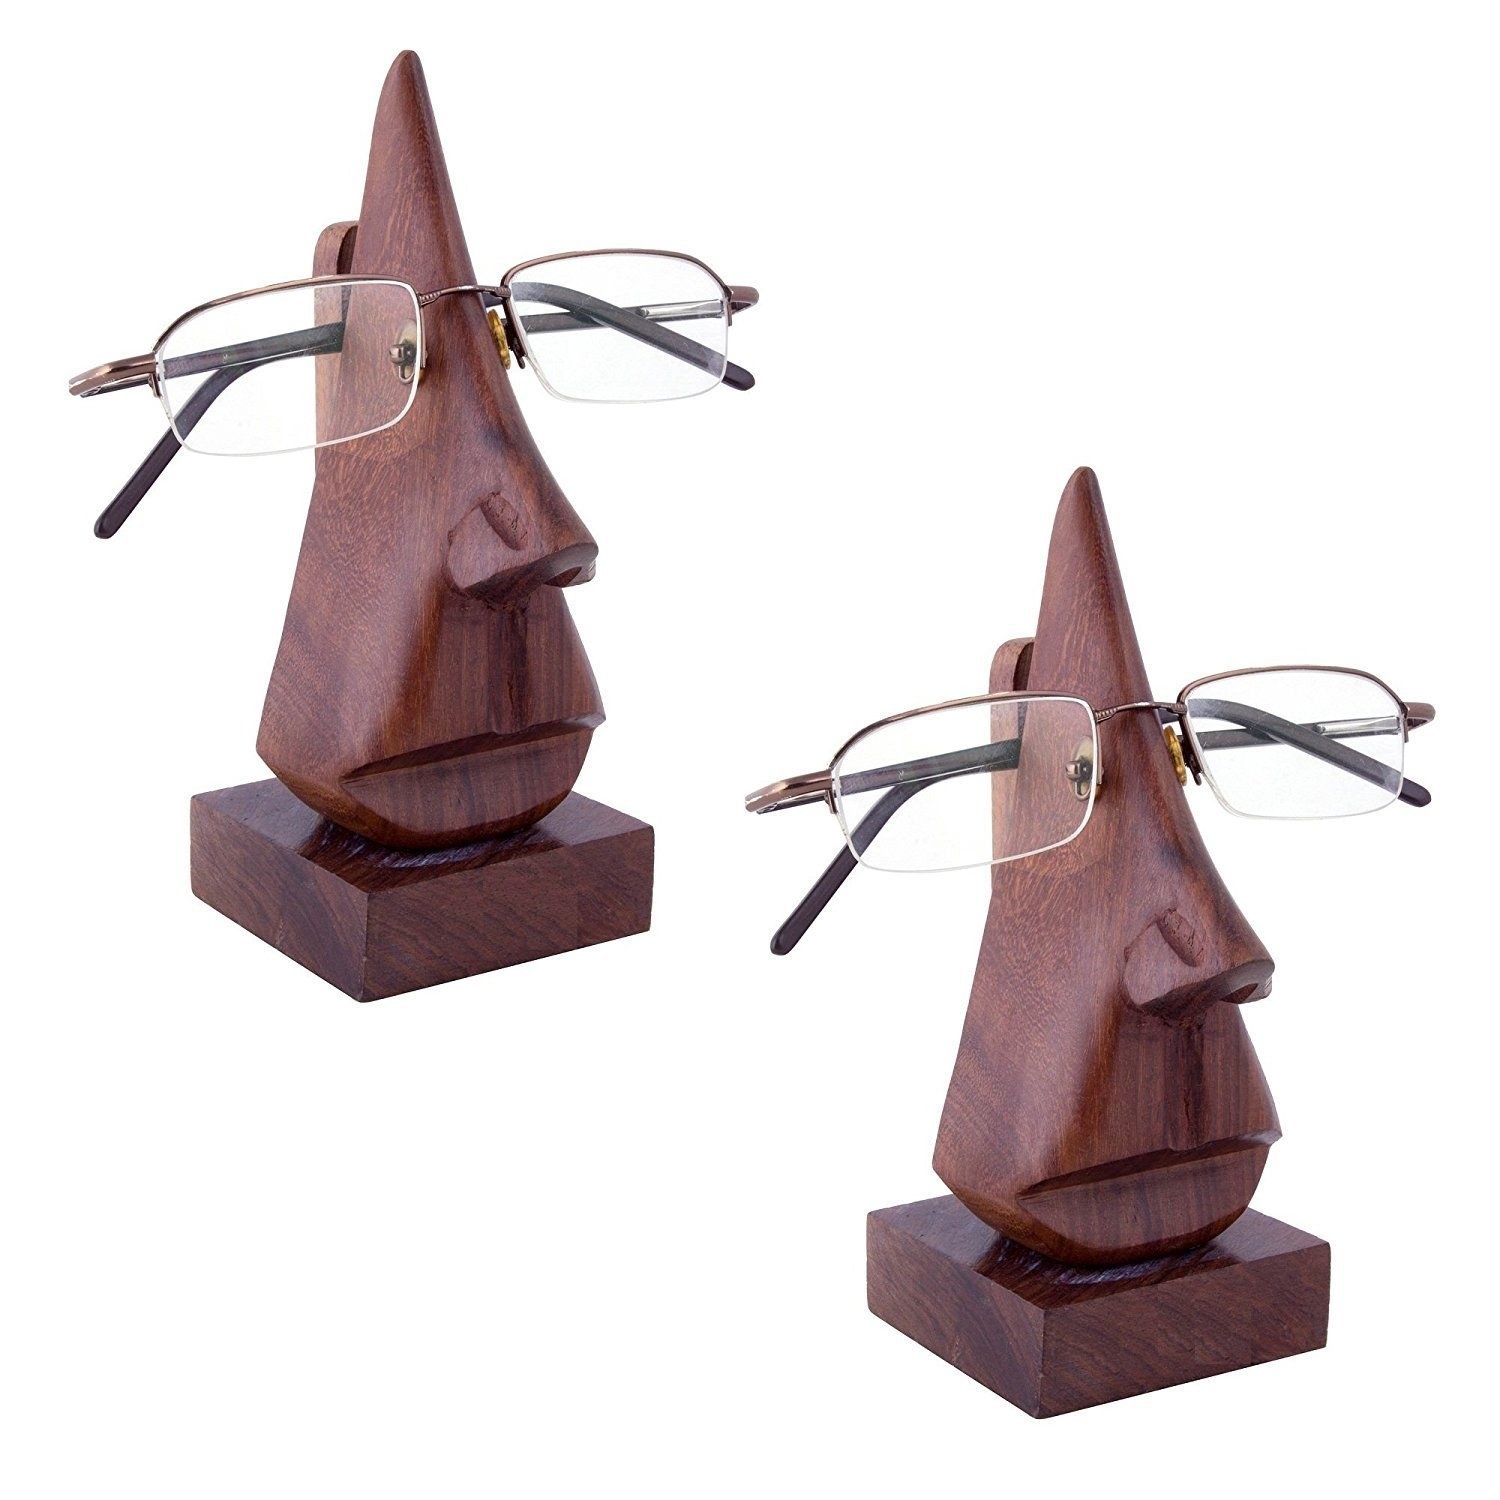 Wooden specs holders in the shape of a human face.